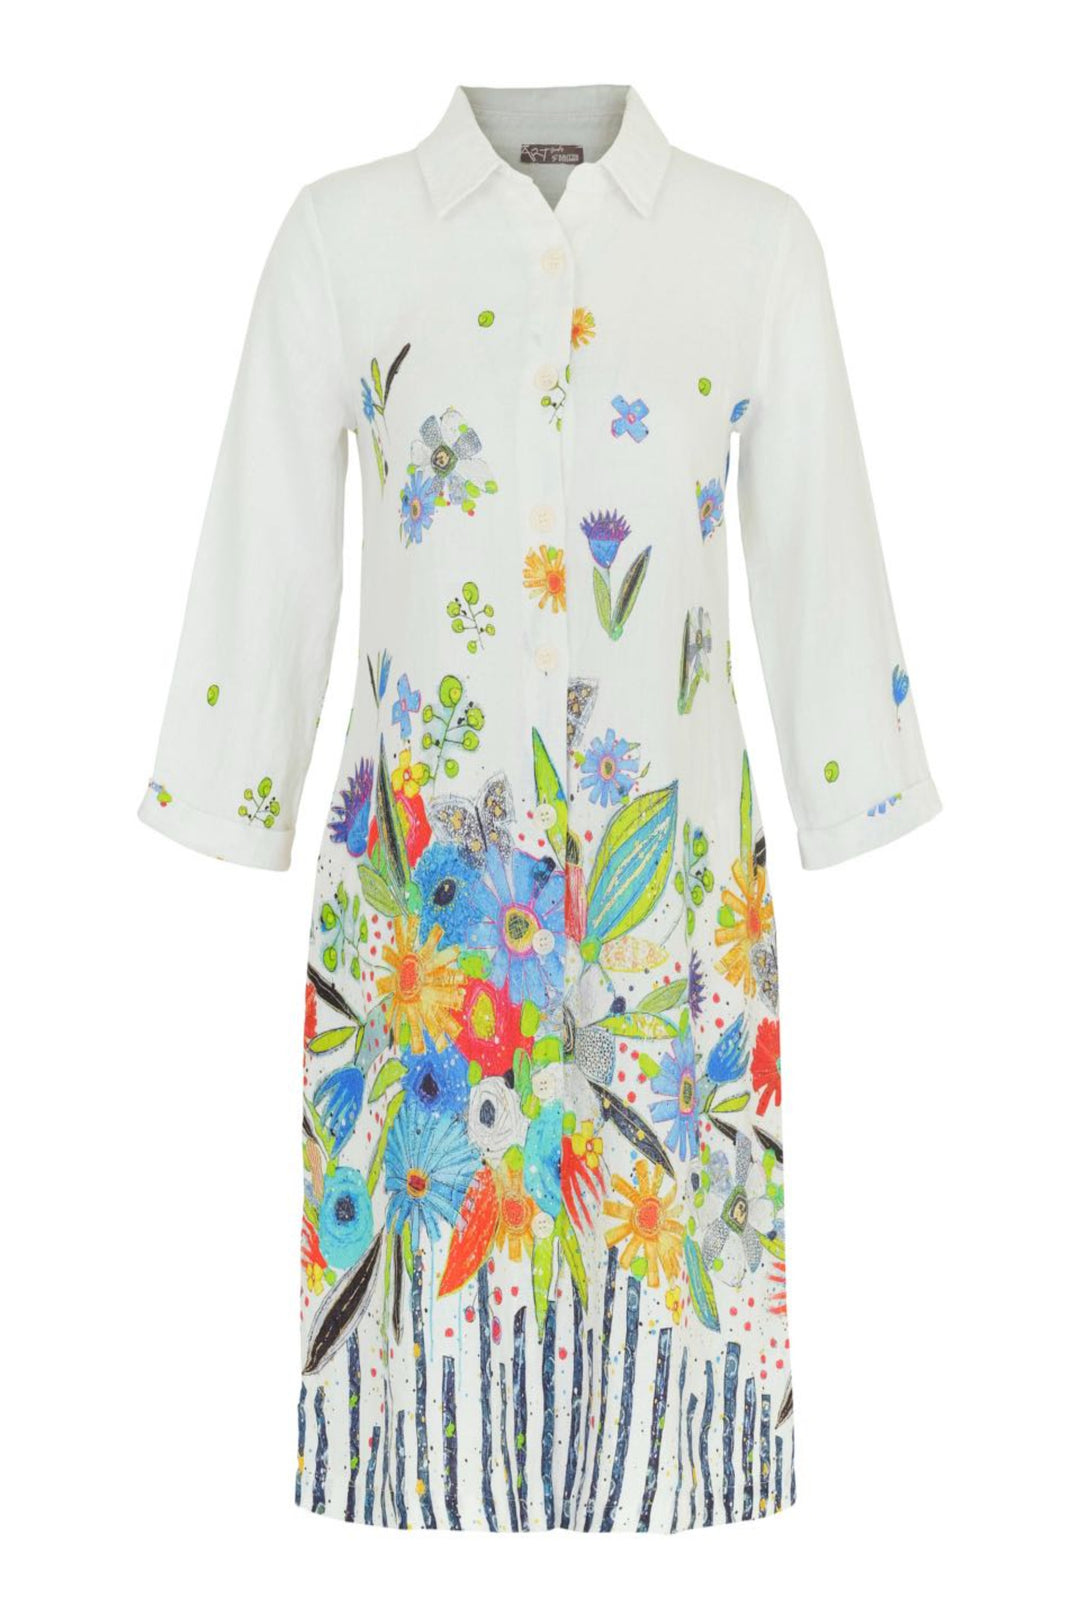 Dolcezza Spring 2024 This wonderful duster dress will add a touch of spring and Easter to your wardrobe! Made of light linen, featuring a classic collar, relaxed fit and shirt-style dress with 3/4 length sleeves- perfect for any spring and summer day!